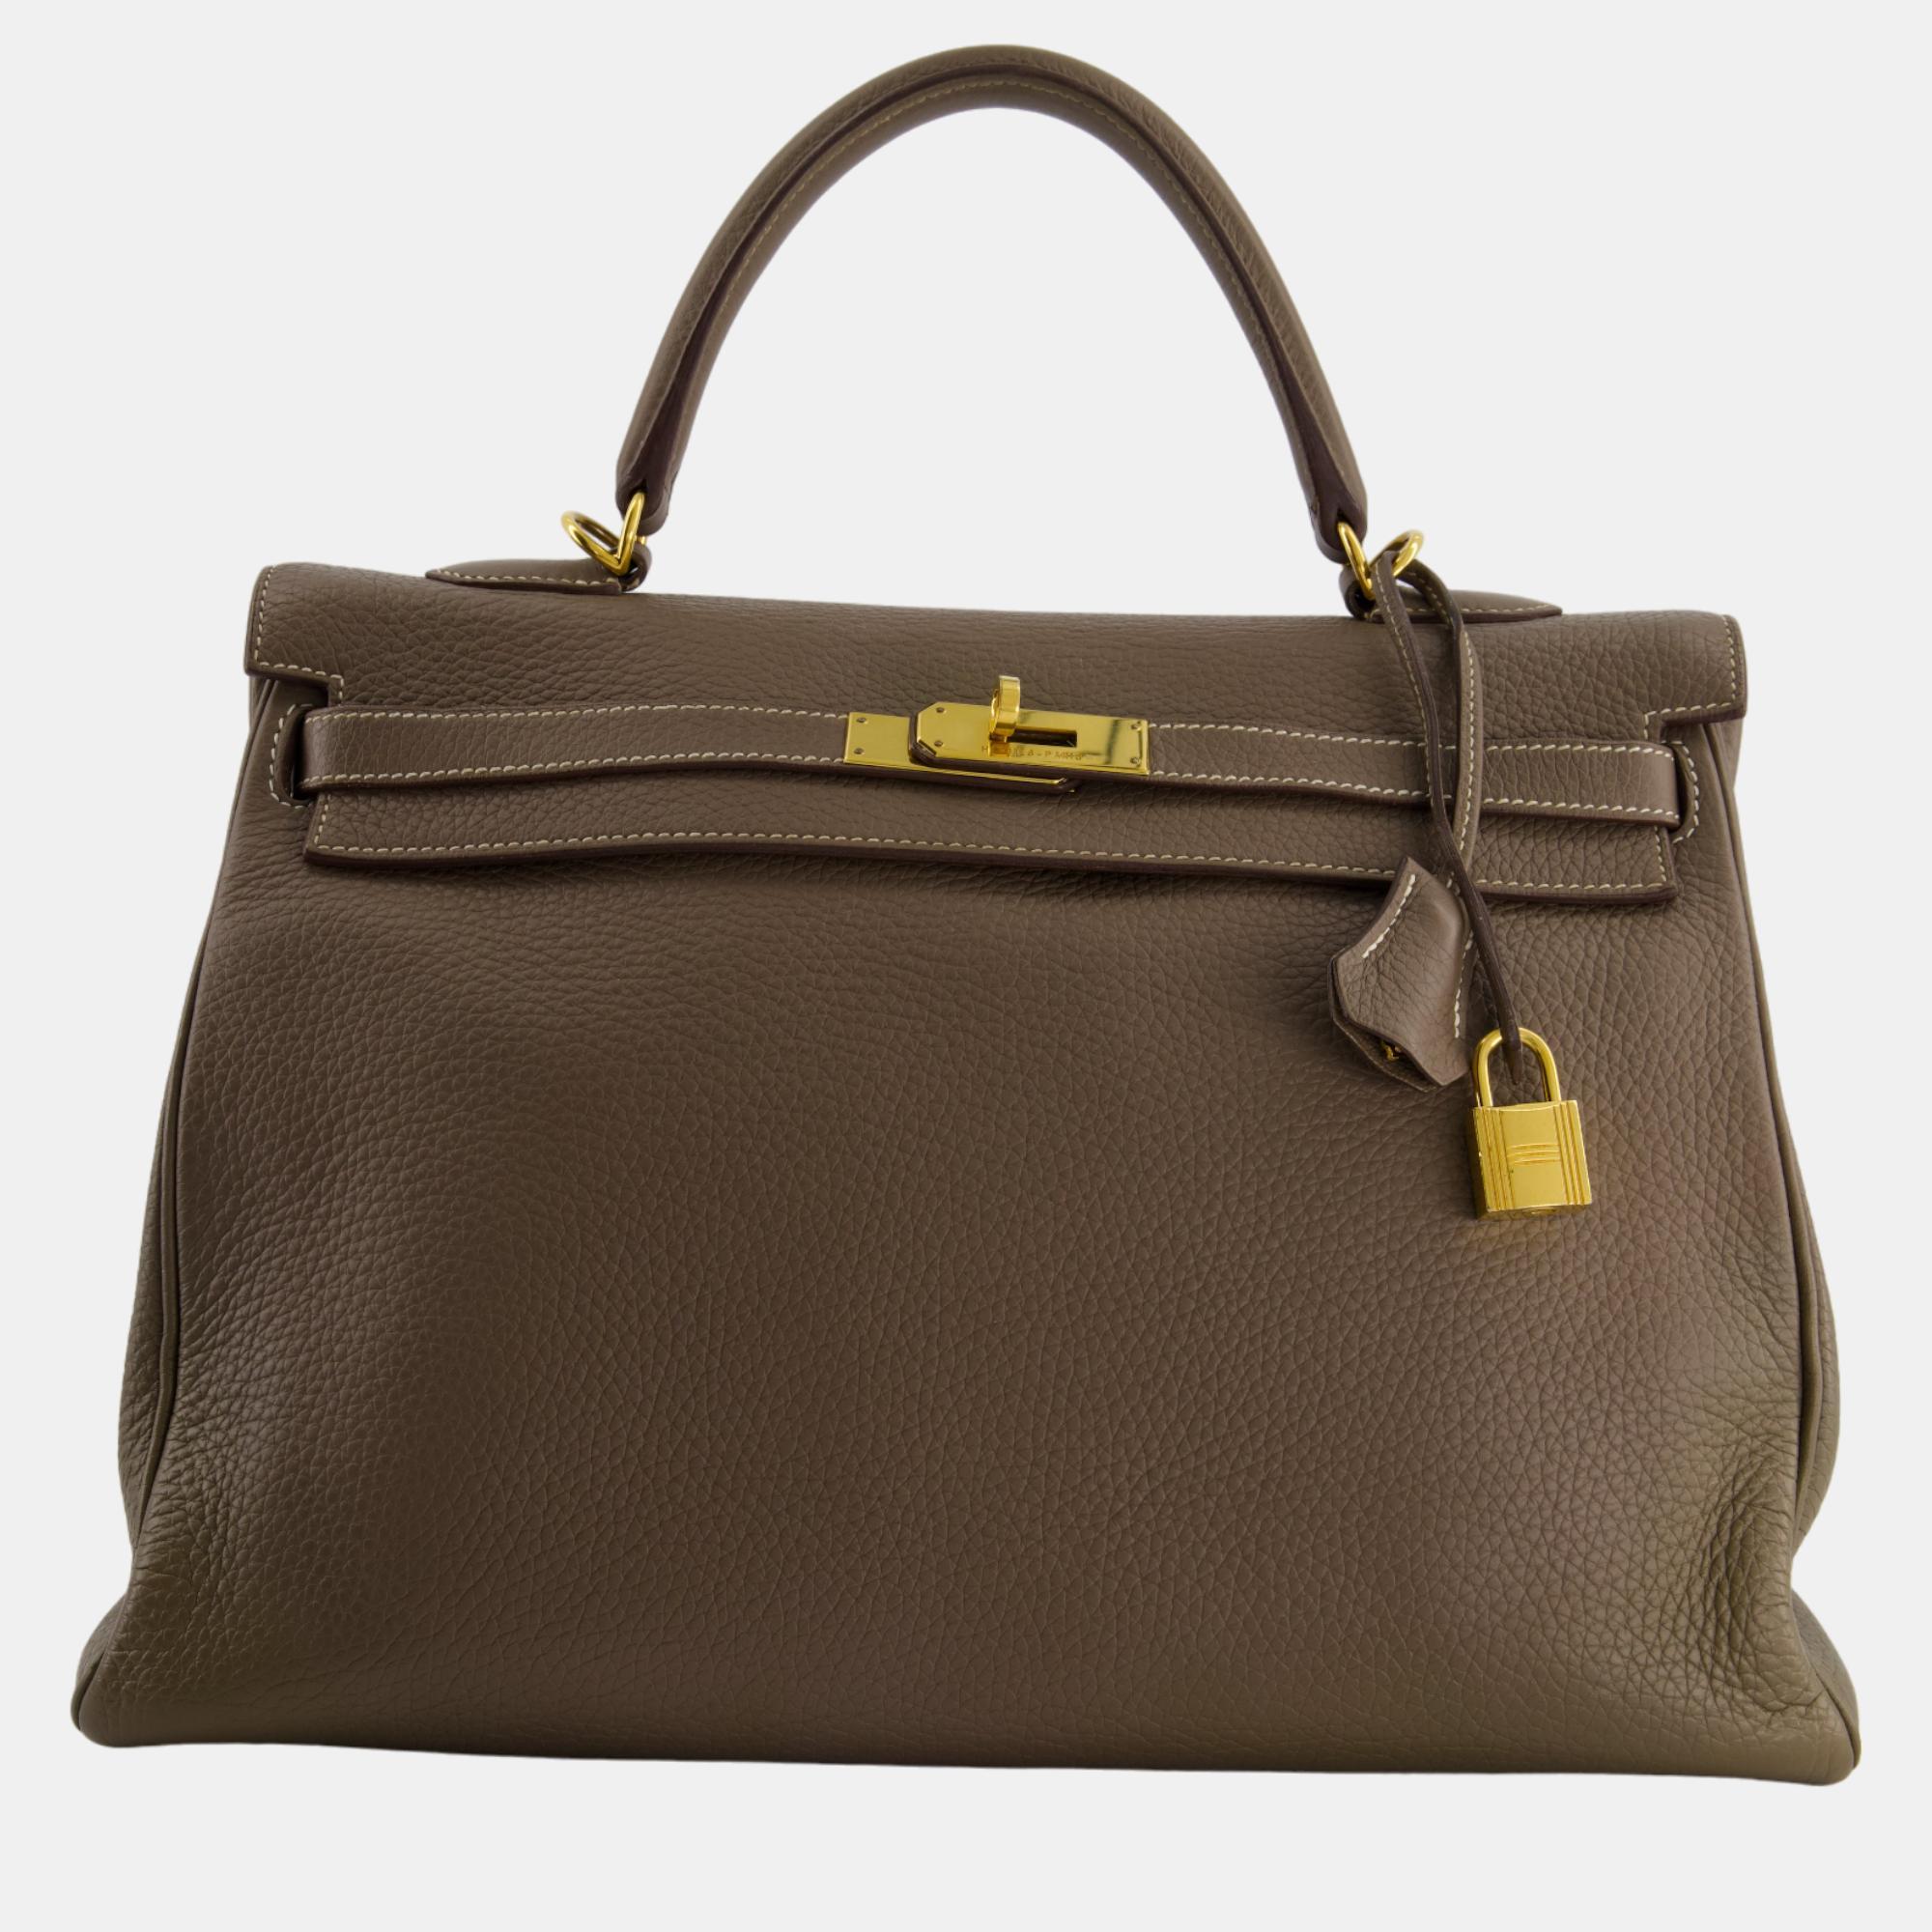 Hermes Kelly Bag 35cm Etoupe Clemence Leather With Gold Hardware